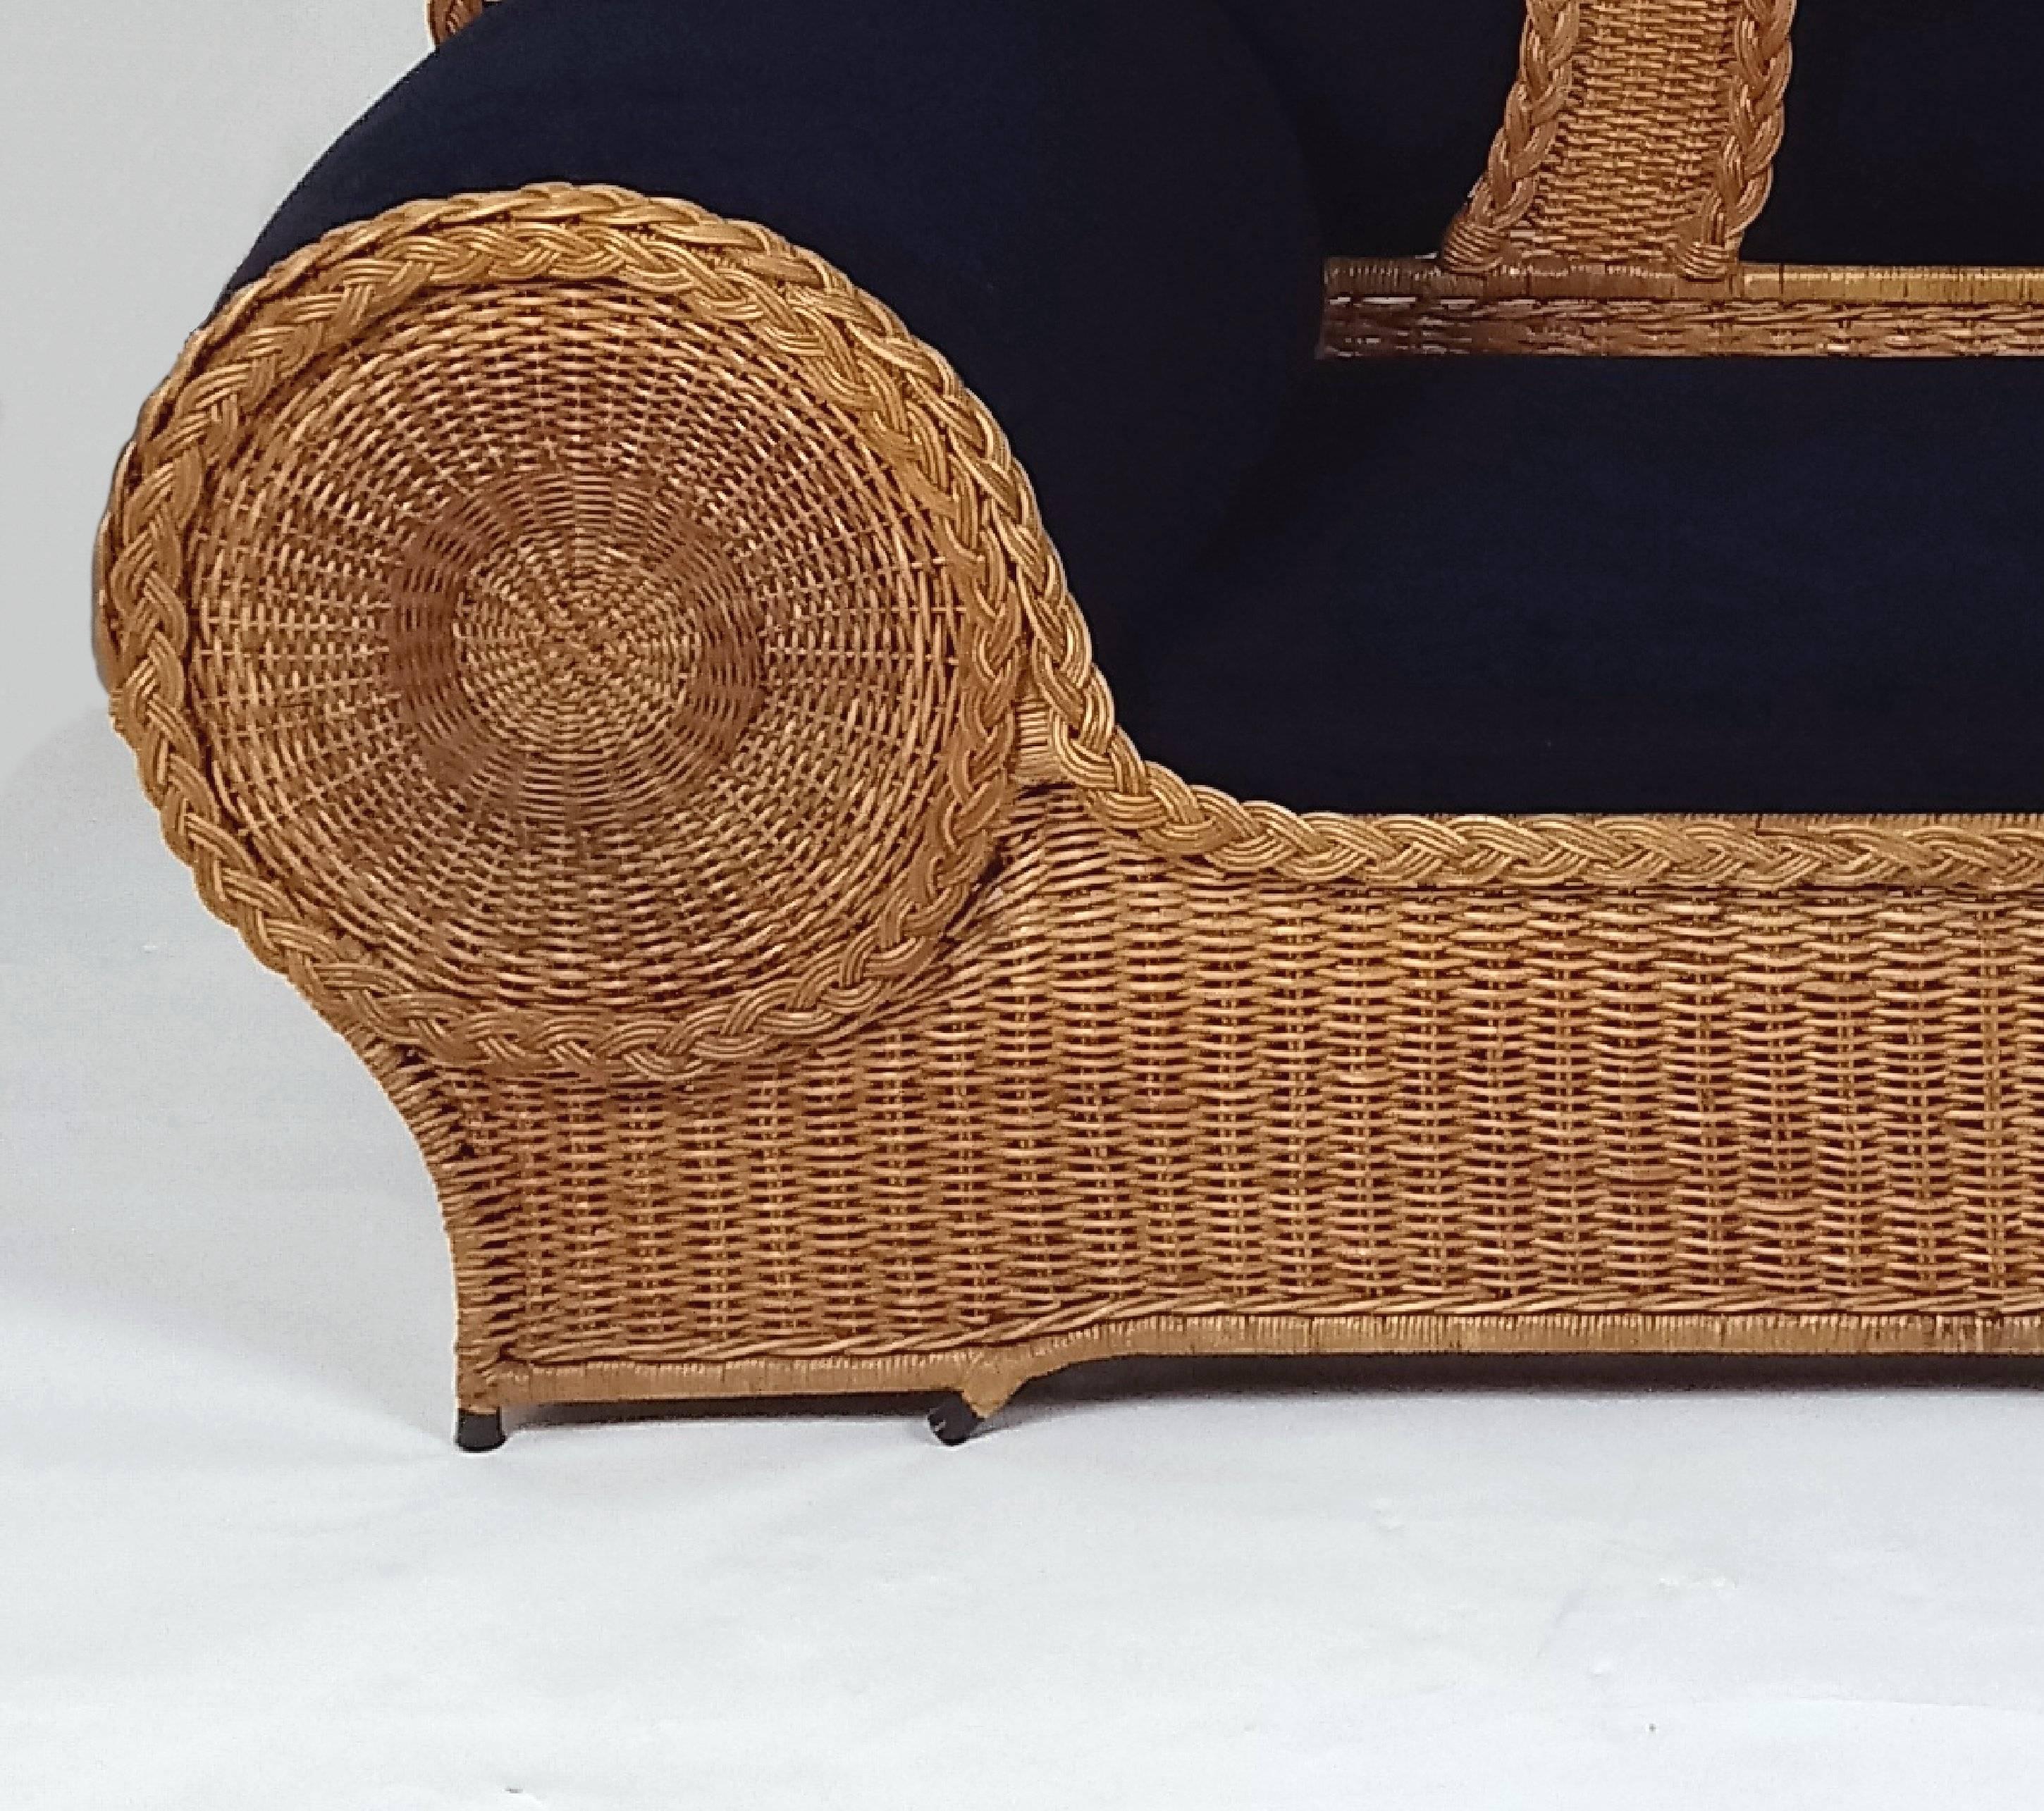 This gorgeous mid-20th Century wicker sofa is from the well-known brand Biba, upholstered in black velvet corduroy. The sofa has a sound and sturdy metal base frame and aside from several very small frays of the wicker, is in amazing condition for